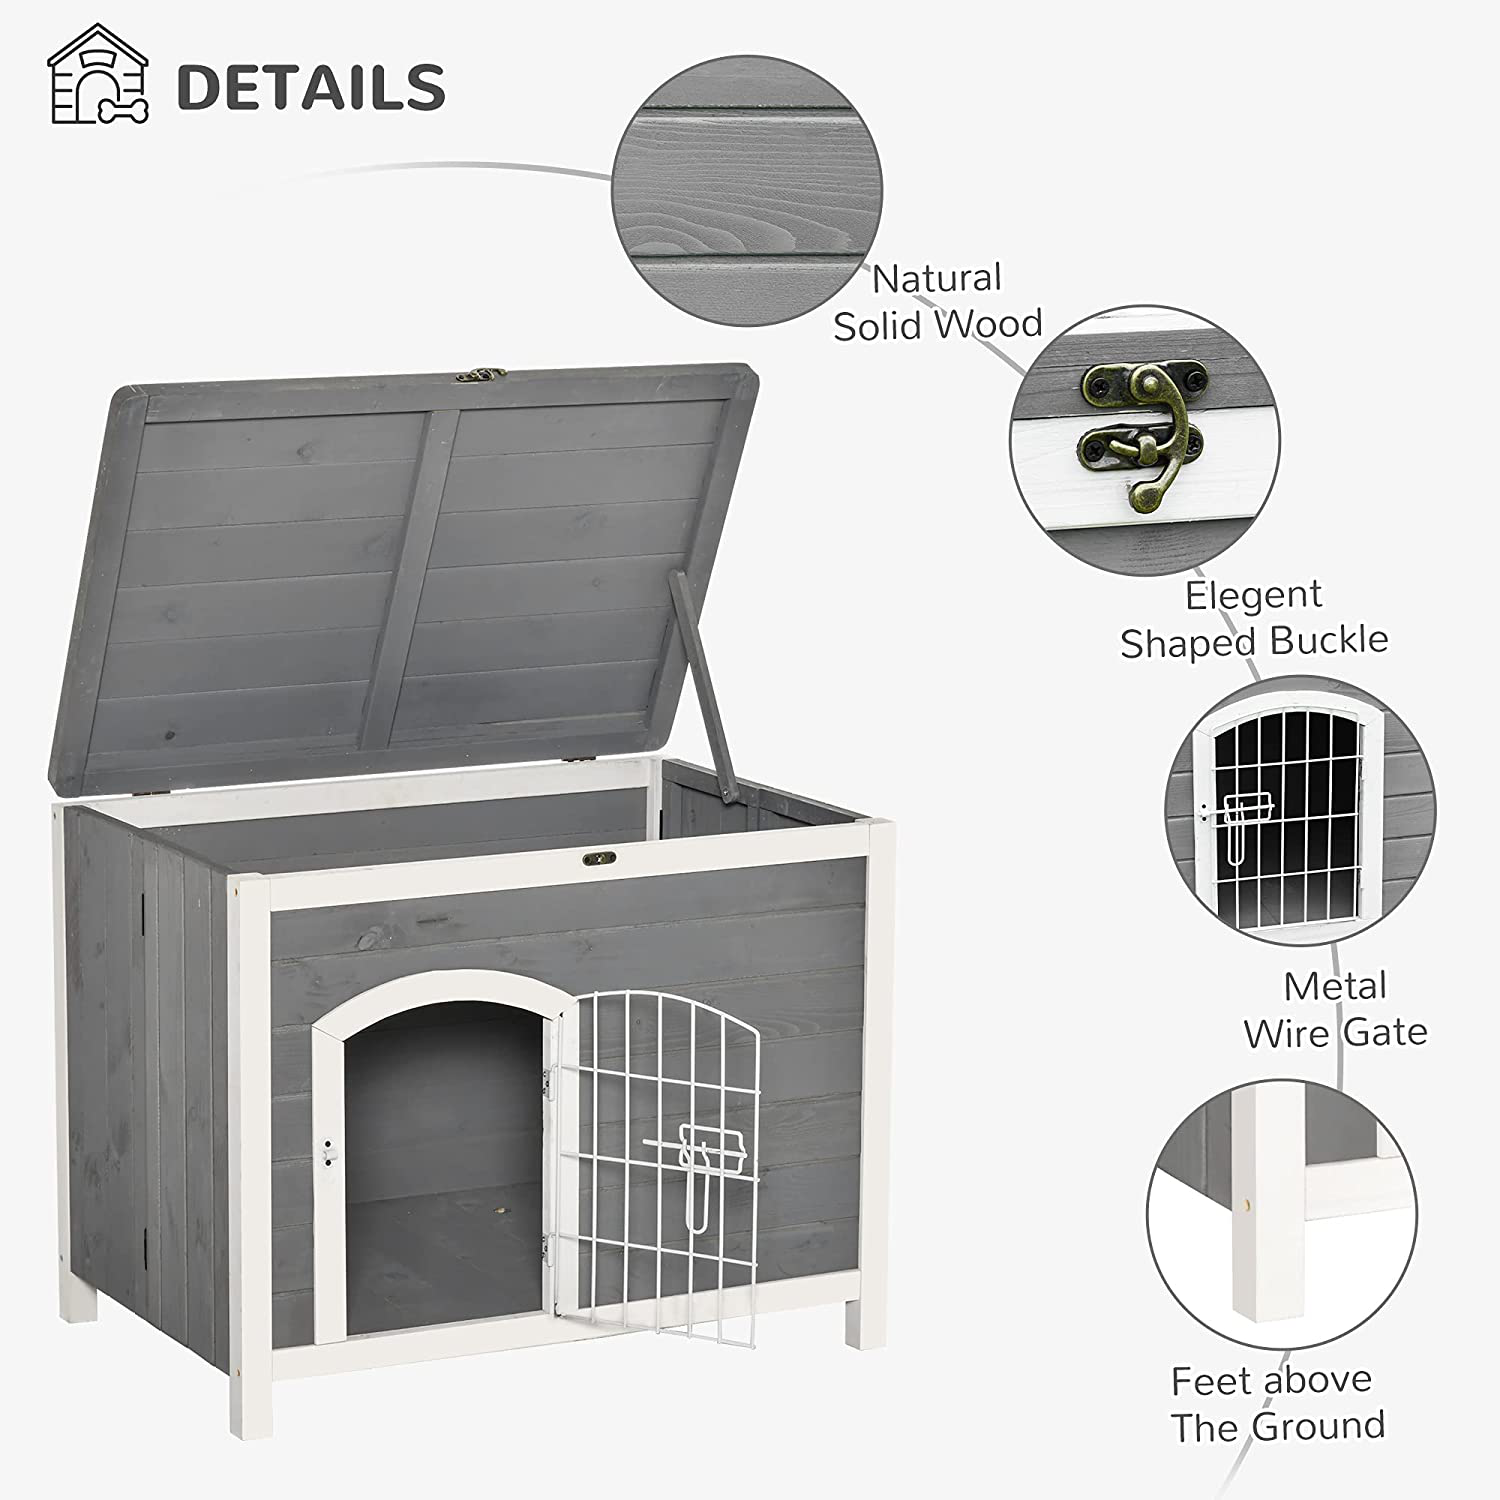 Pawhut Foldable Raised Wooden Dog House Indoor & Outdoor Dog Cage Kennel Cat House W/Lockable Door Openable Roof Removable Bottom for Small and Medium Pets Grey